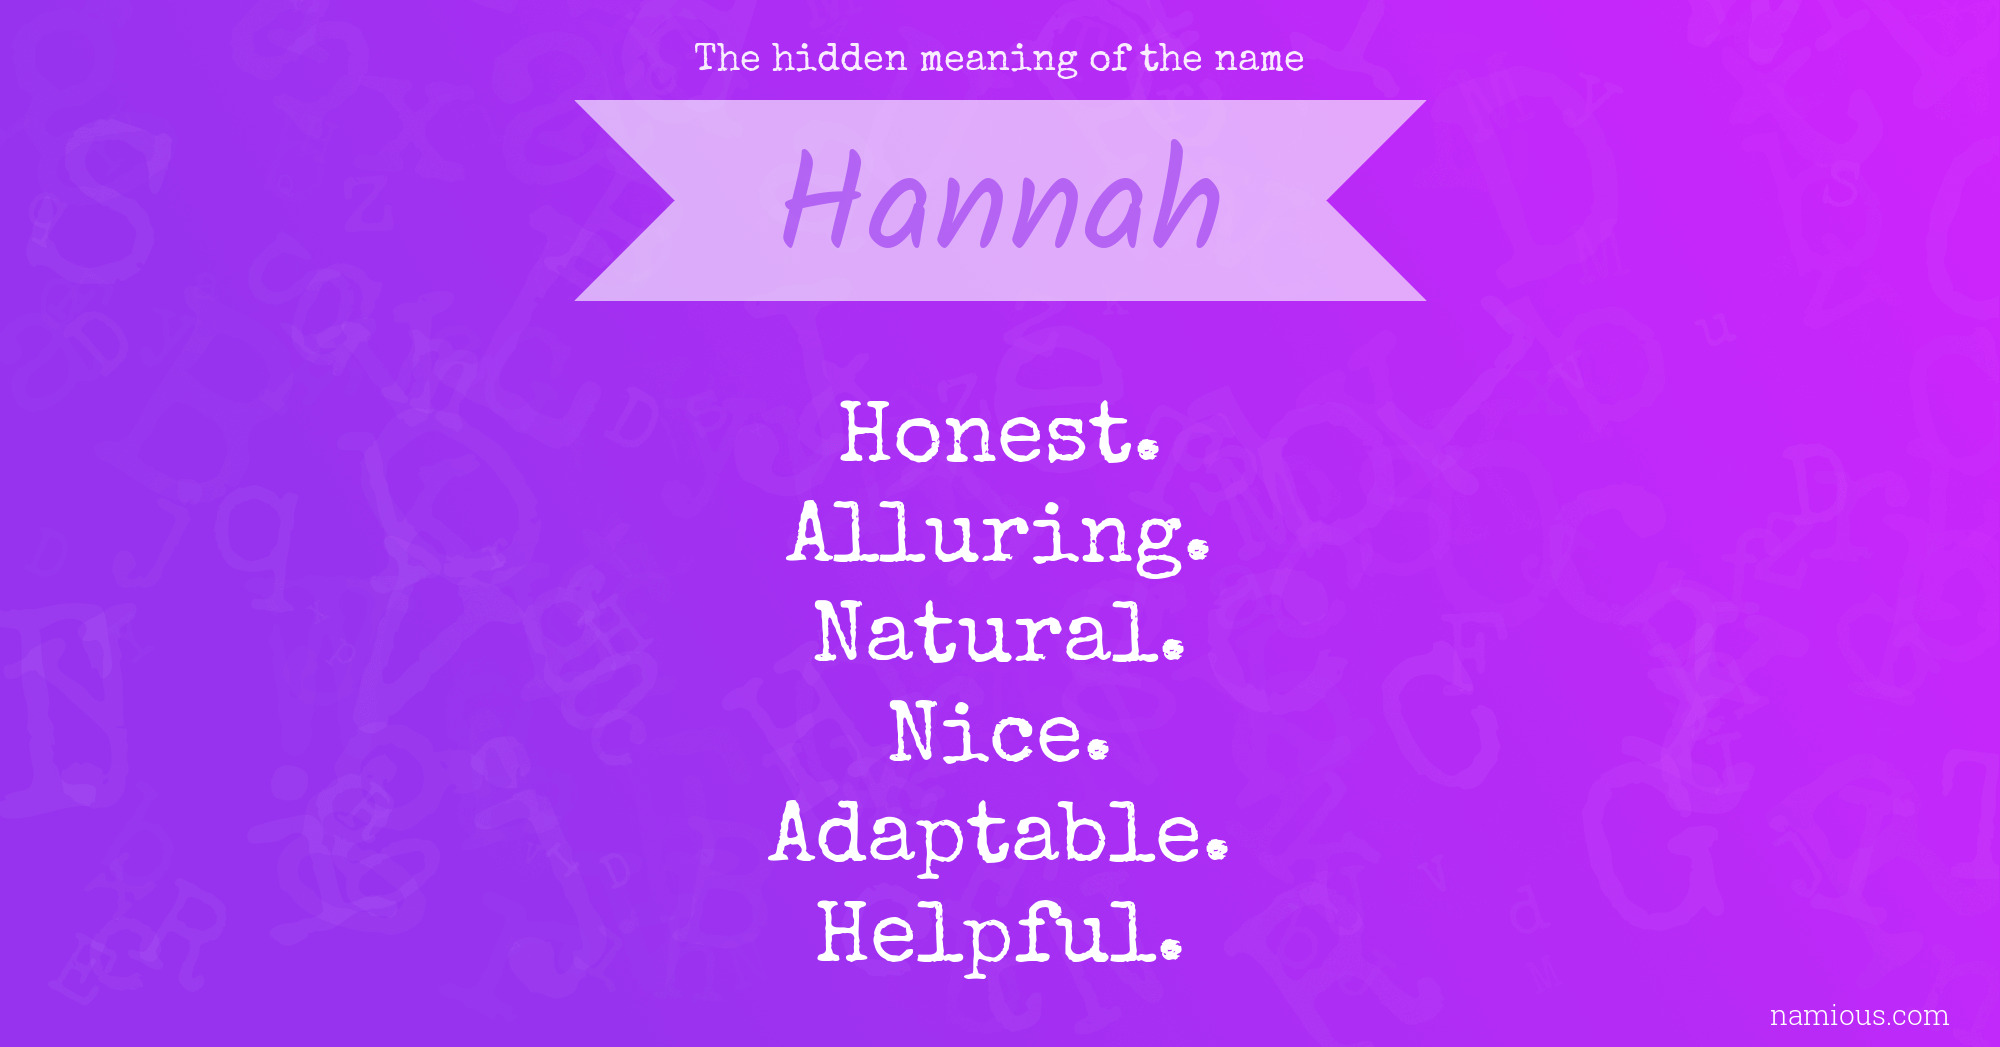 The hidden meaning of the name Hannah